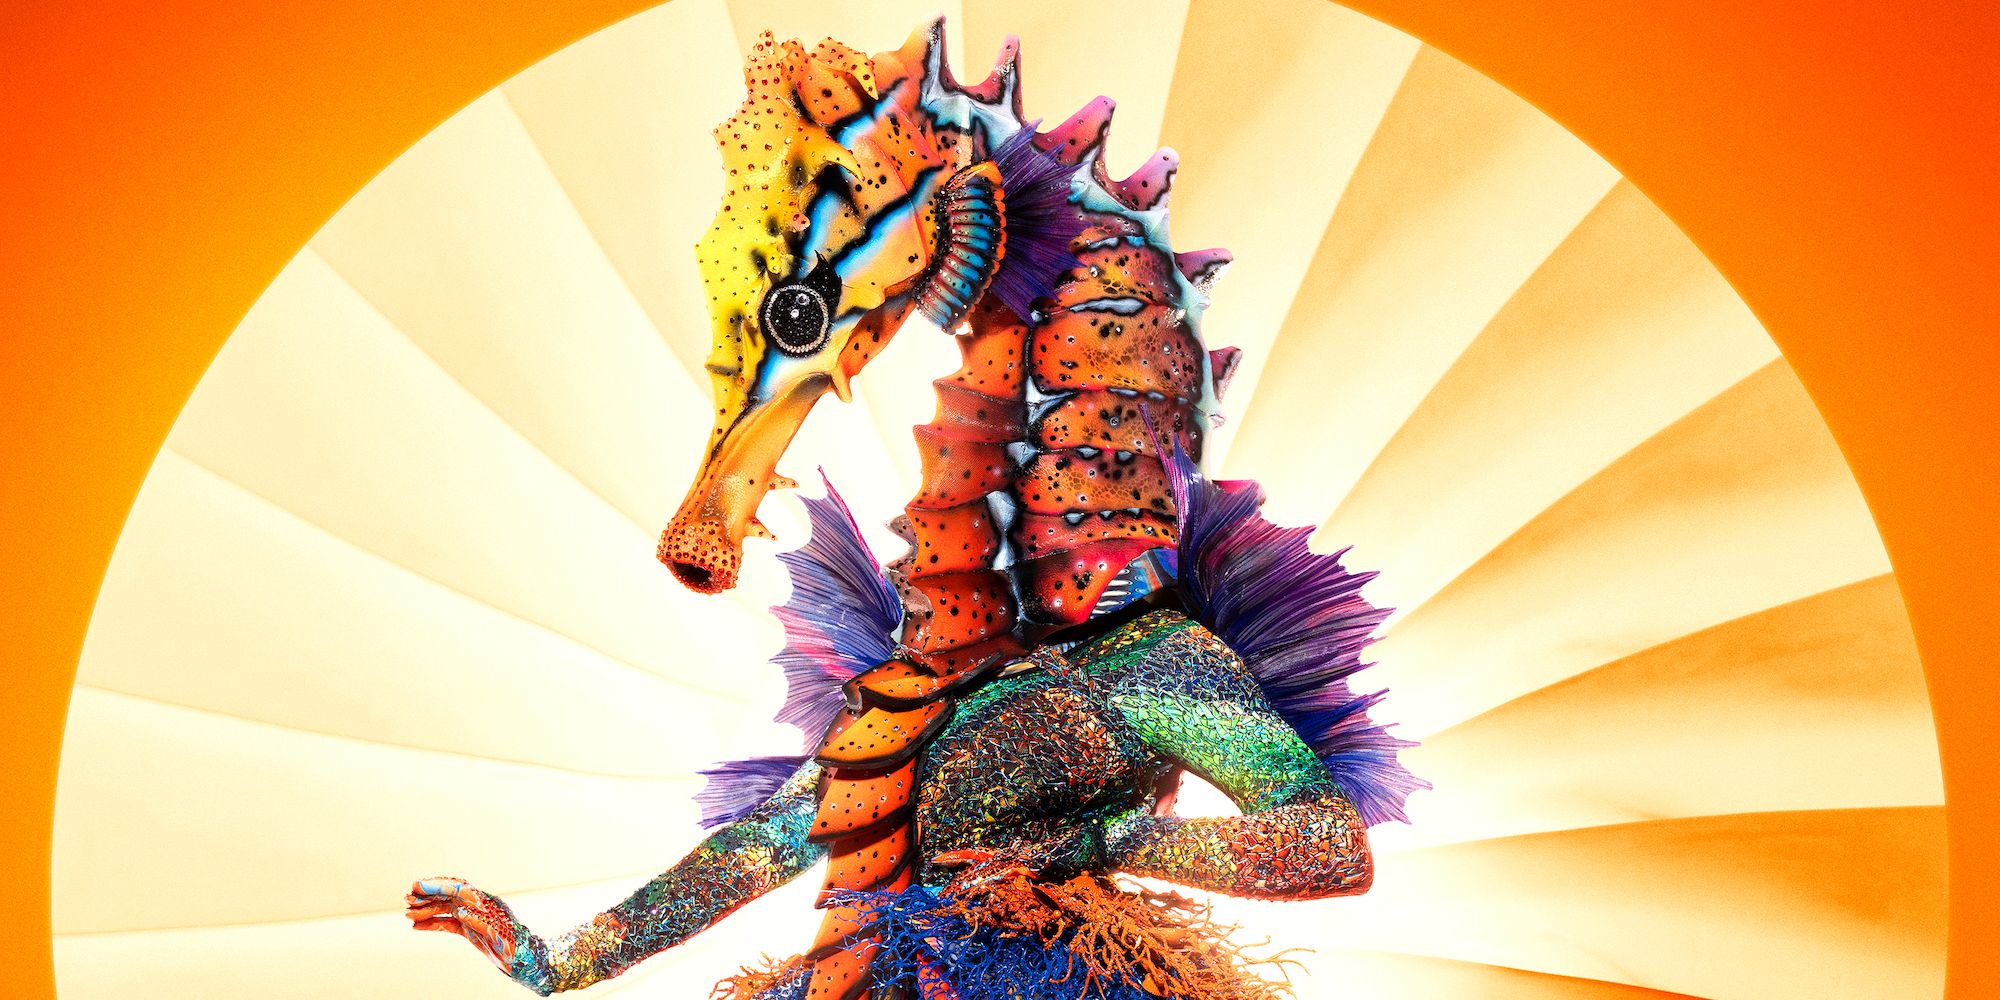 Promo image for the Seahorse from The Masked Singer